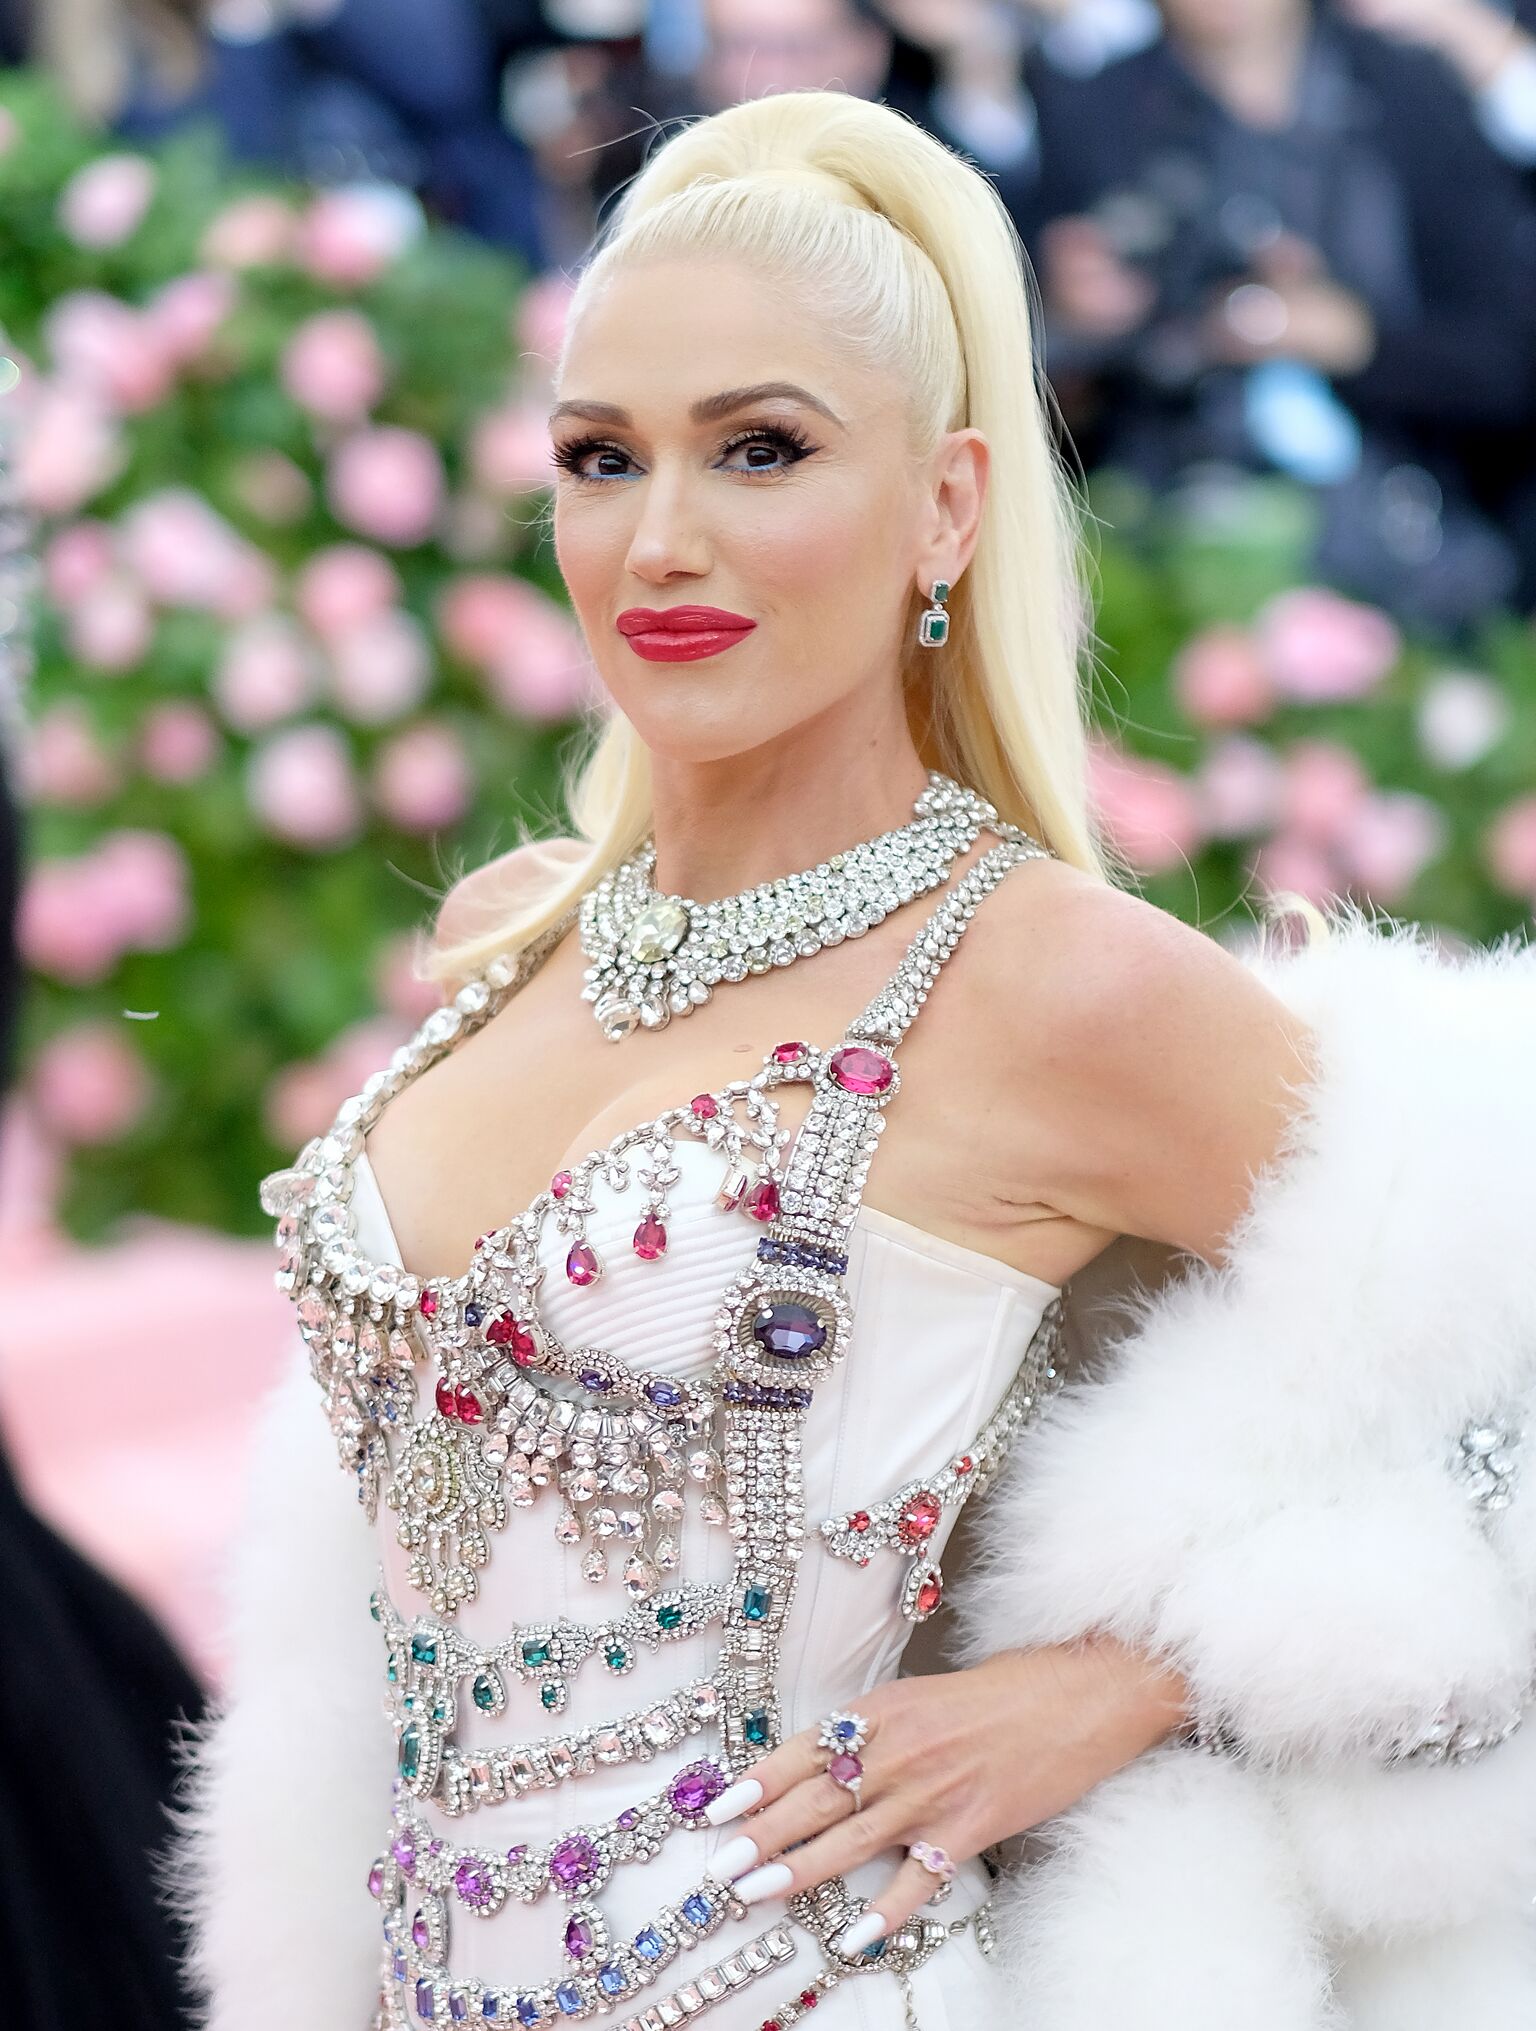 Gwen Stefani Celebrates Mom's Birthday with Throwback Pic Get to Know